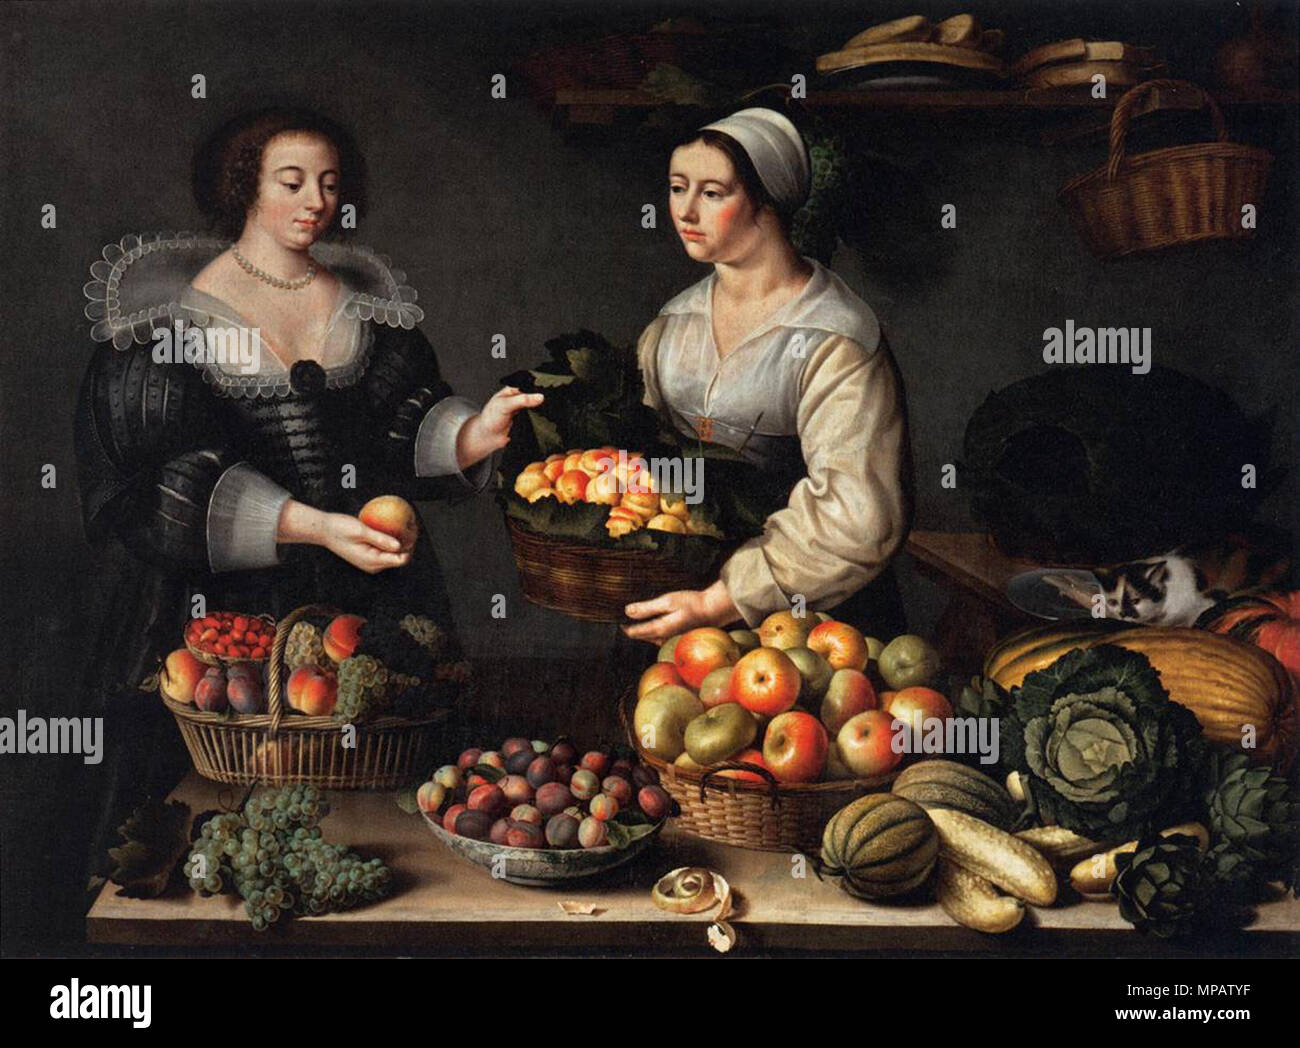 The Fruit and Vegetable Costermonger   1631.   899 Moillon, Louise - The Fruit and Vegetable Costermonger - 1631 Stock Photo